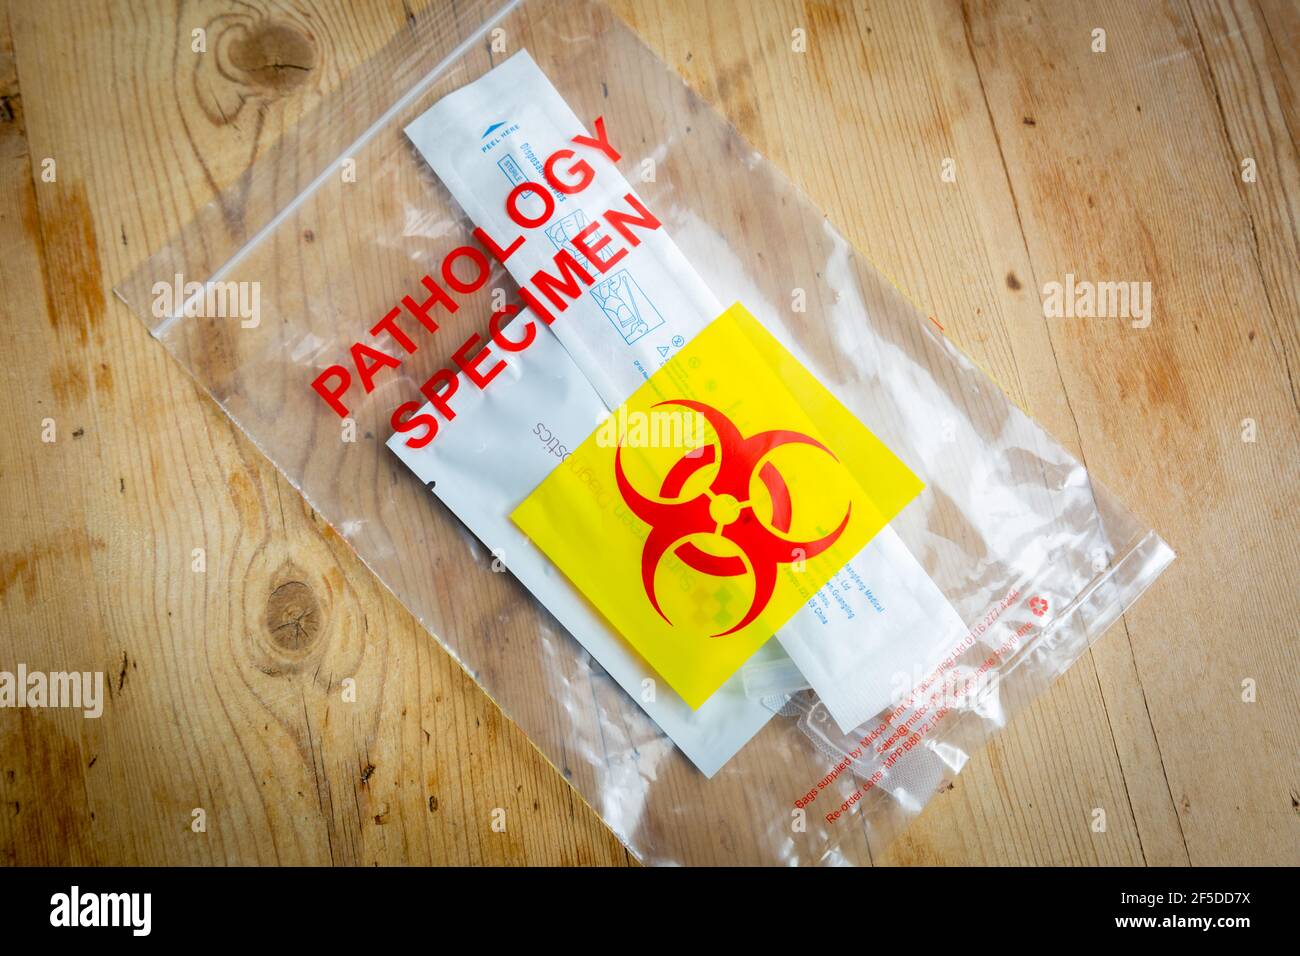 Lateral flow Covid-19 test kit and its components Stock Photo